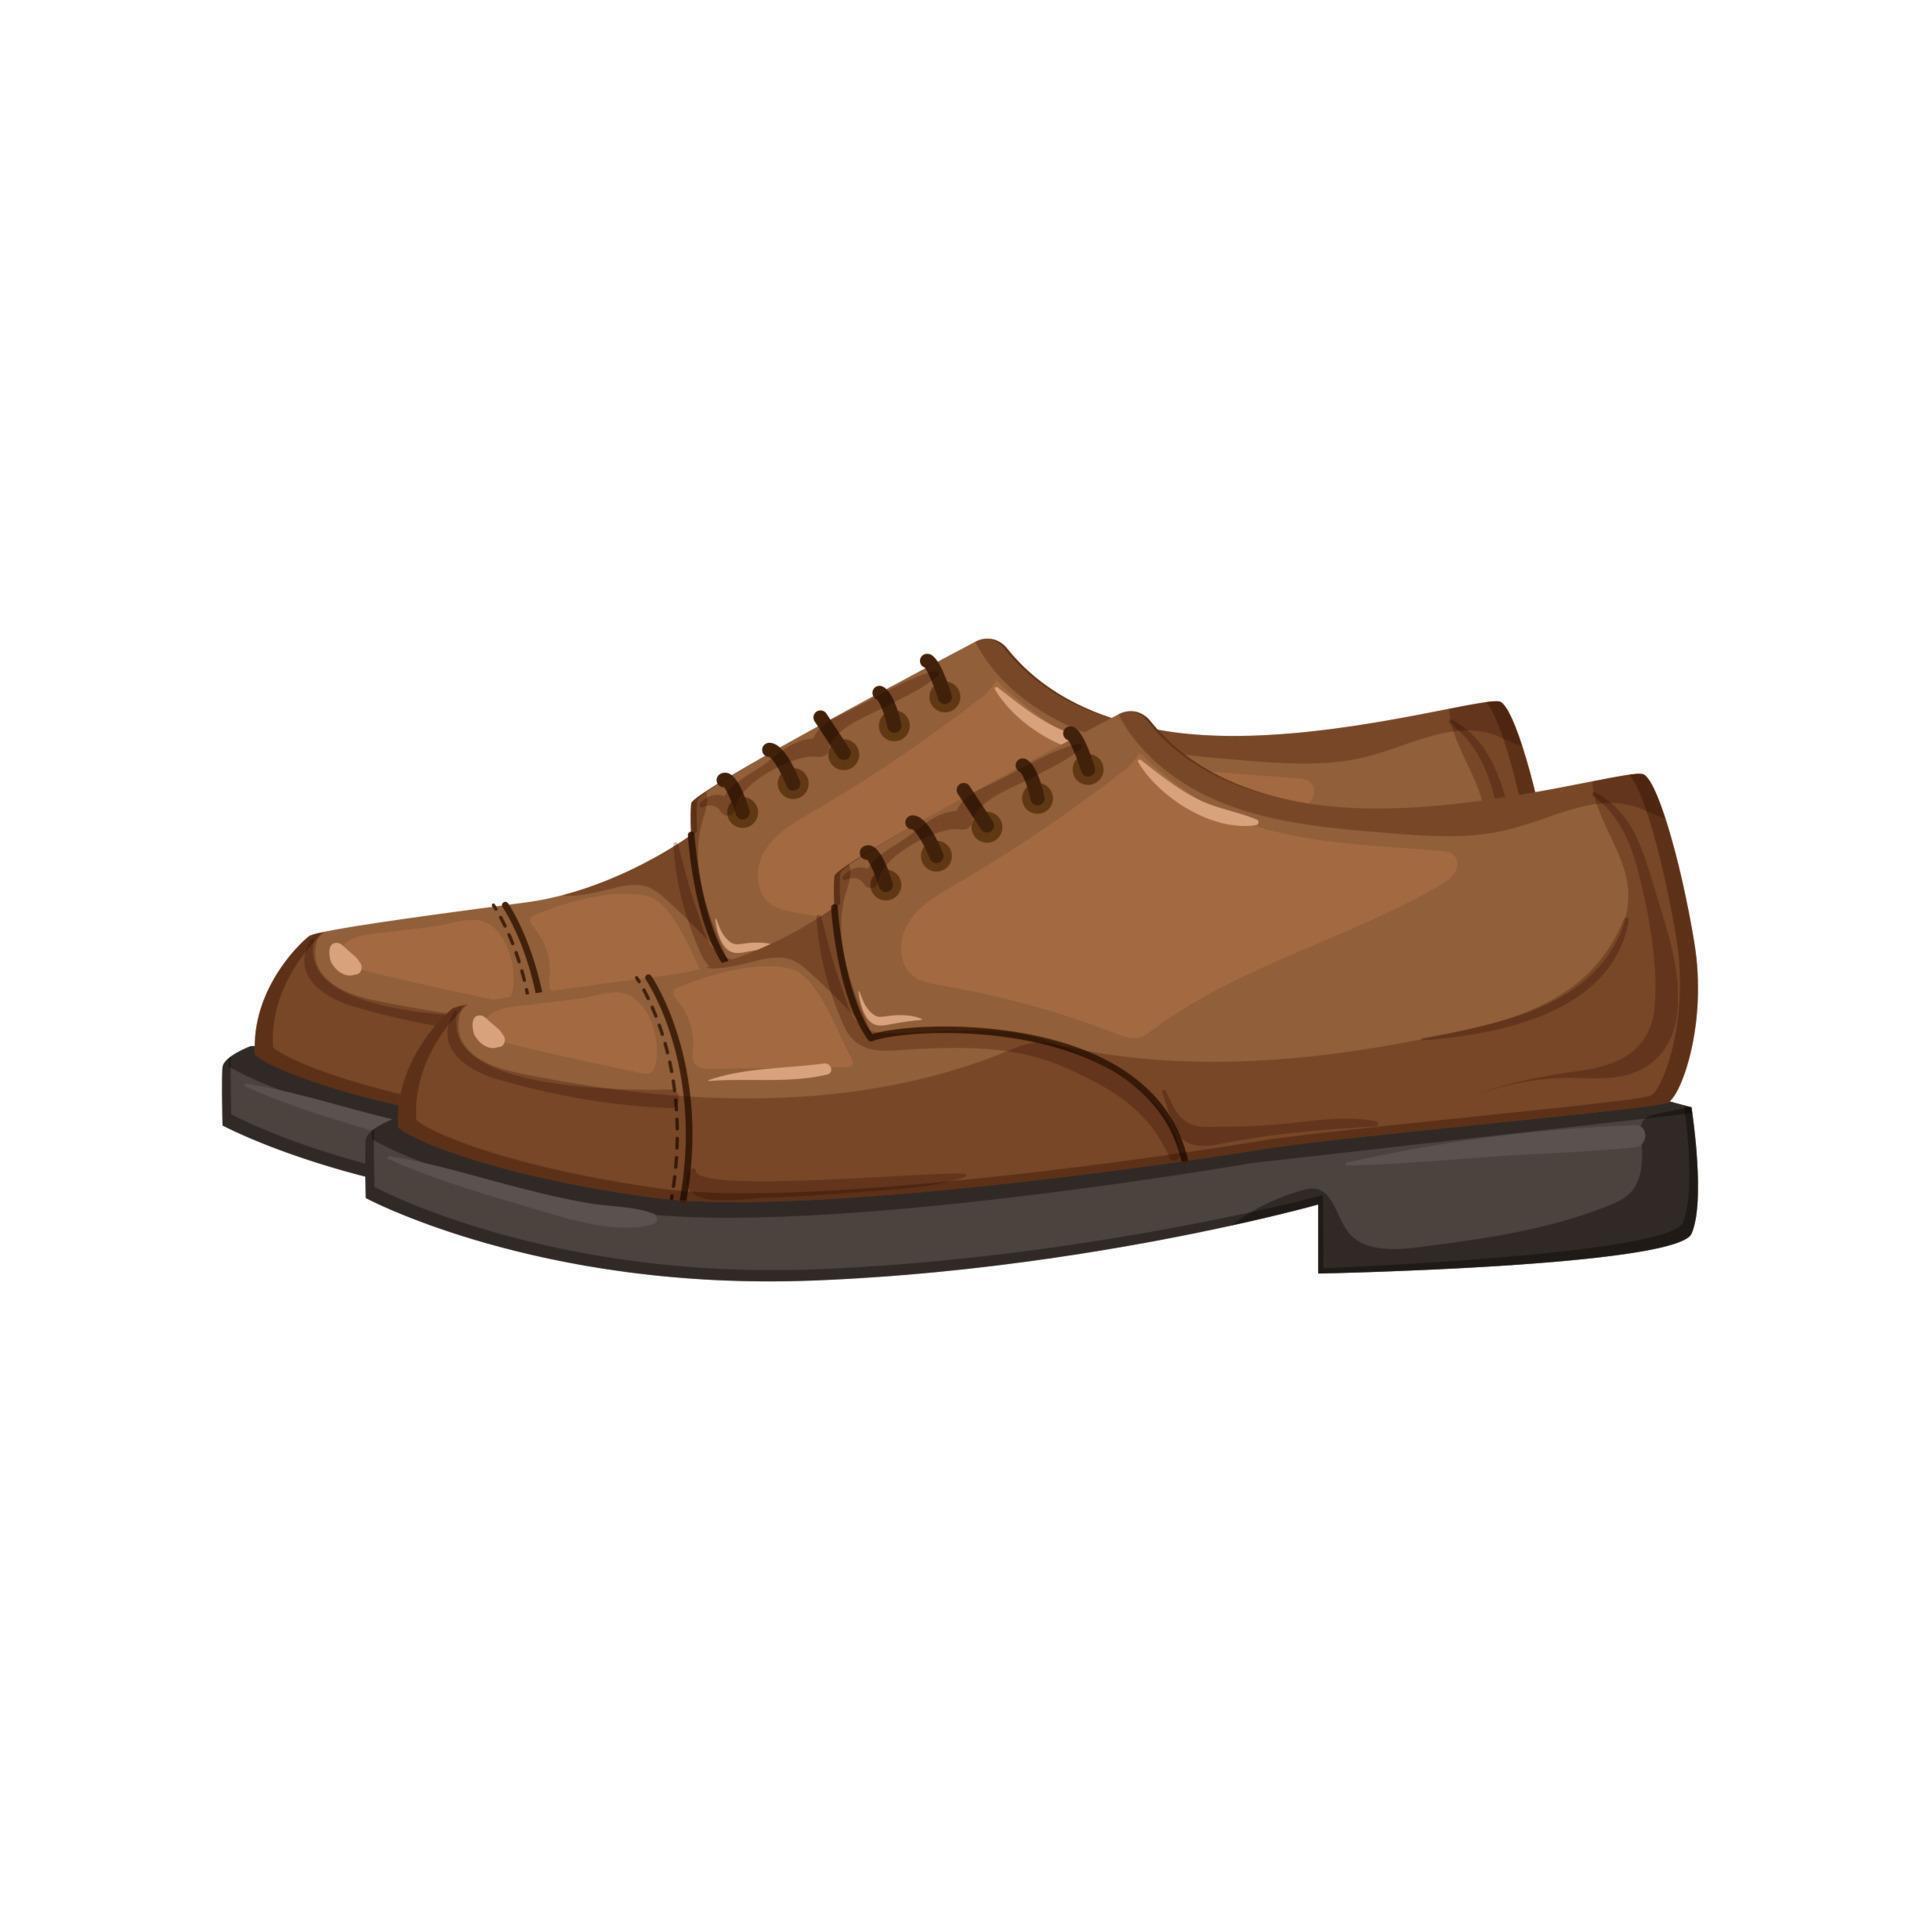 leather man shoes cartoon vector illustration 17416733 Vector Art at ...